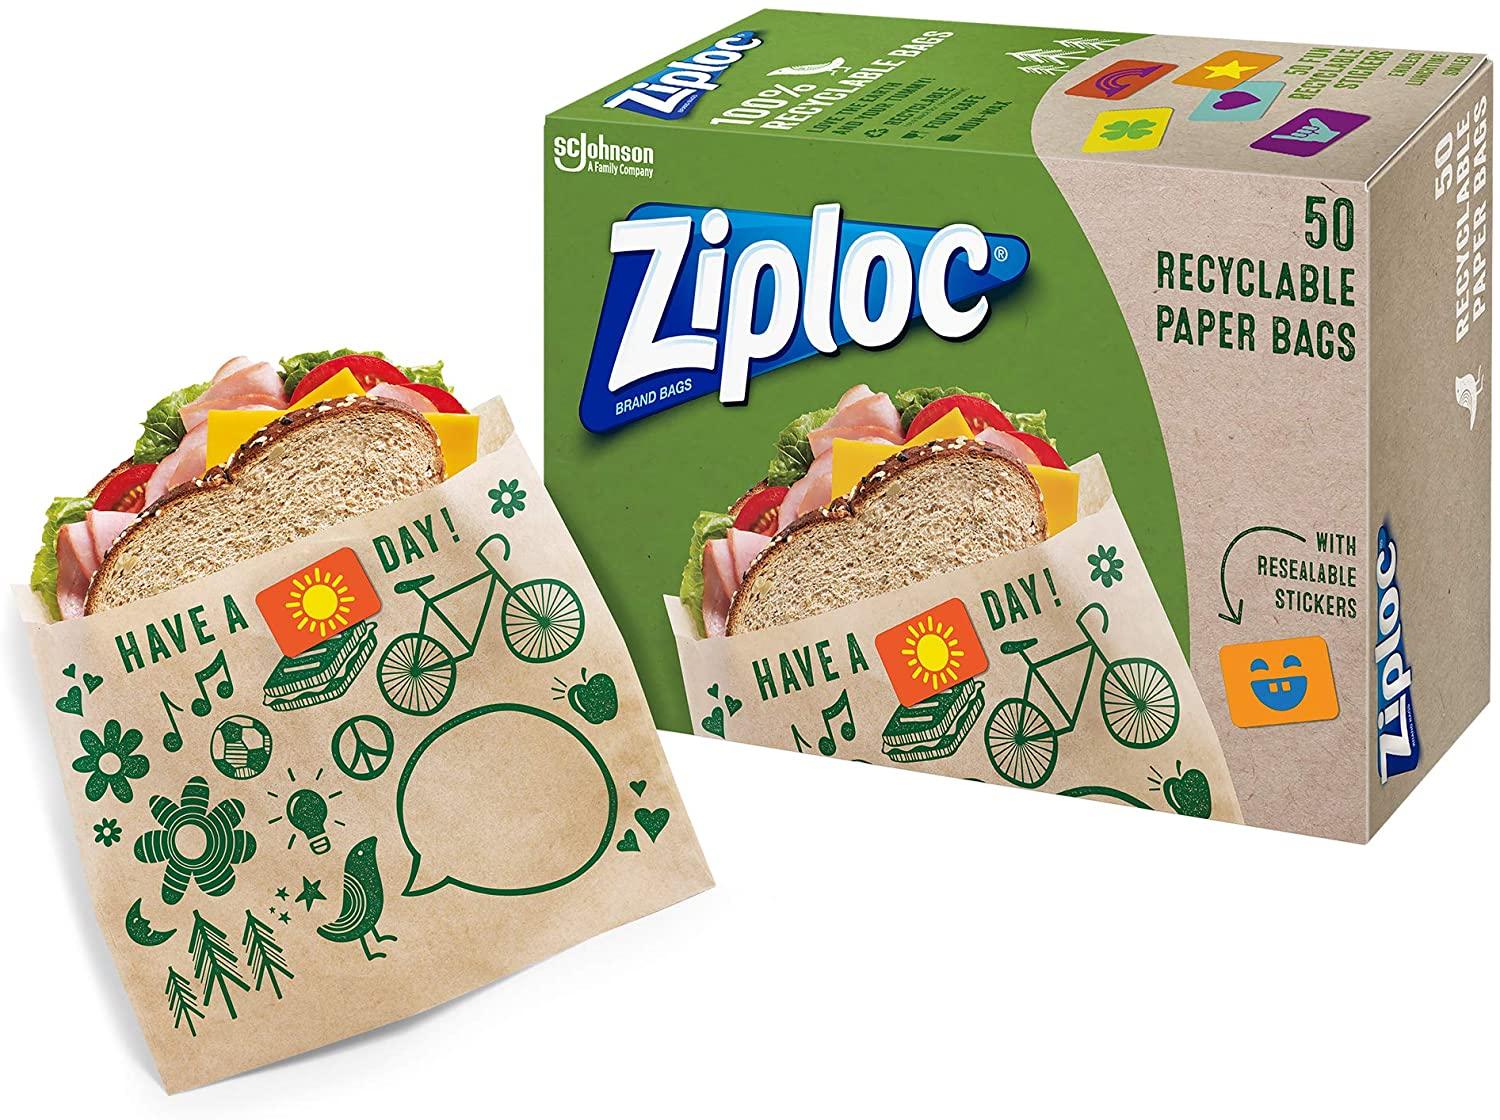 50 Ziploc Recyclable and Sealable Paper Sandwich Bags for $3.89 Shipped